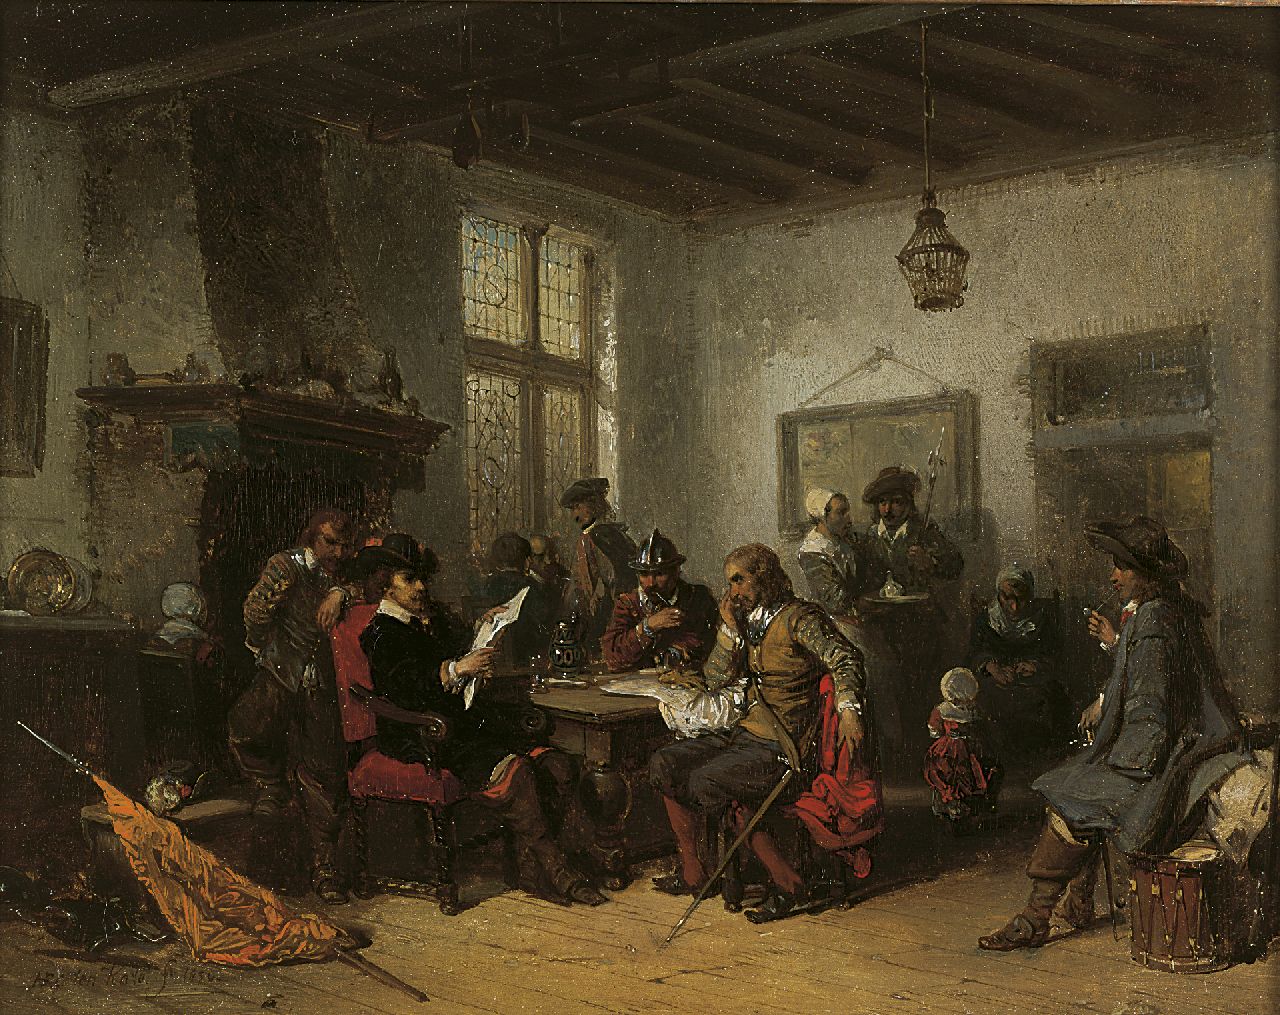 Kate H.F.C. ten | 'Herman' Frederik Carel ten Kate, A tavern, oil on panel 20.5 x 26.1 cm, signed l.l. and dated 1850